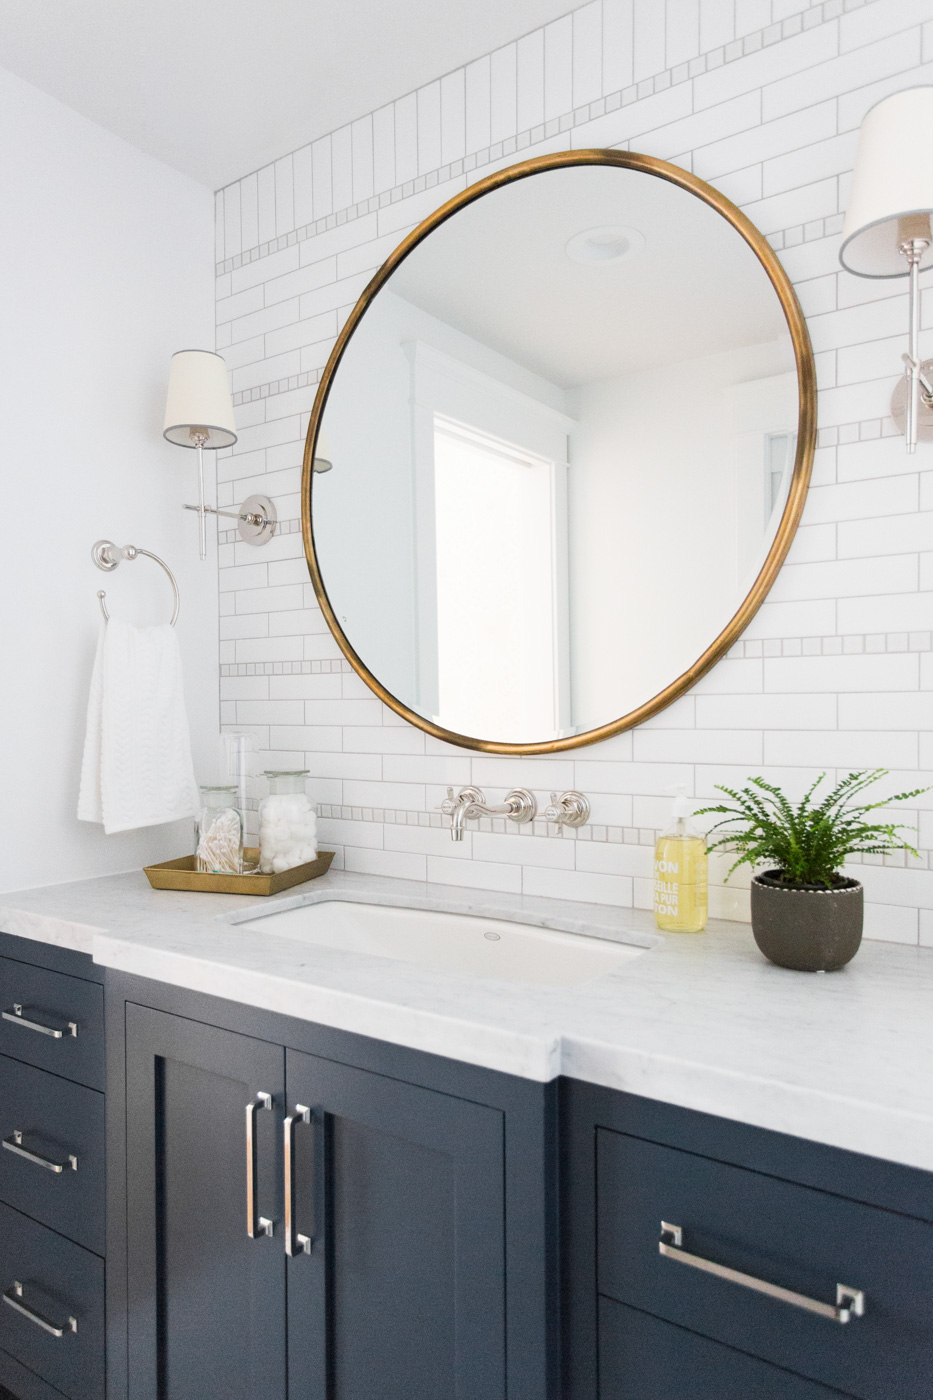 Bathroom Mirrors Are Going Full Circle, Bathroom Vanity With Round Mirror